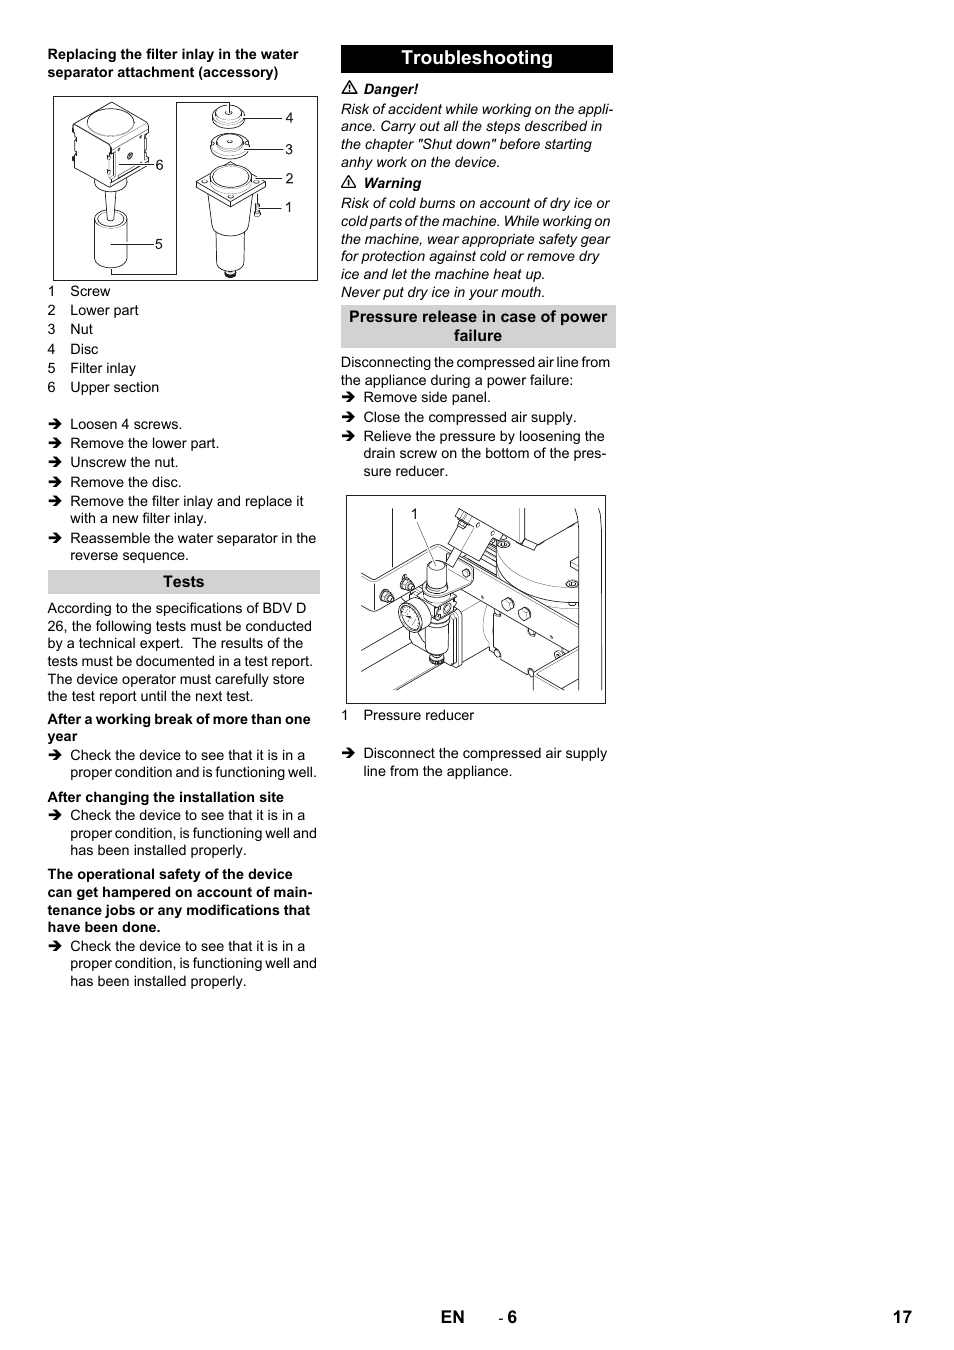 Troubleshooting | Karcher IB 15-80 User Manual | Page 17 / 88